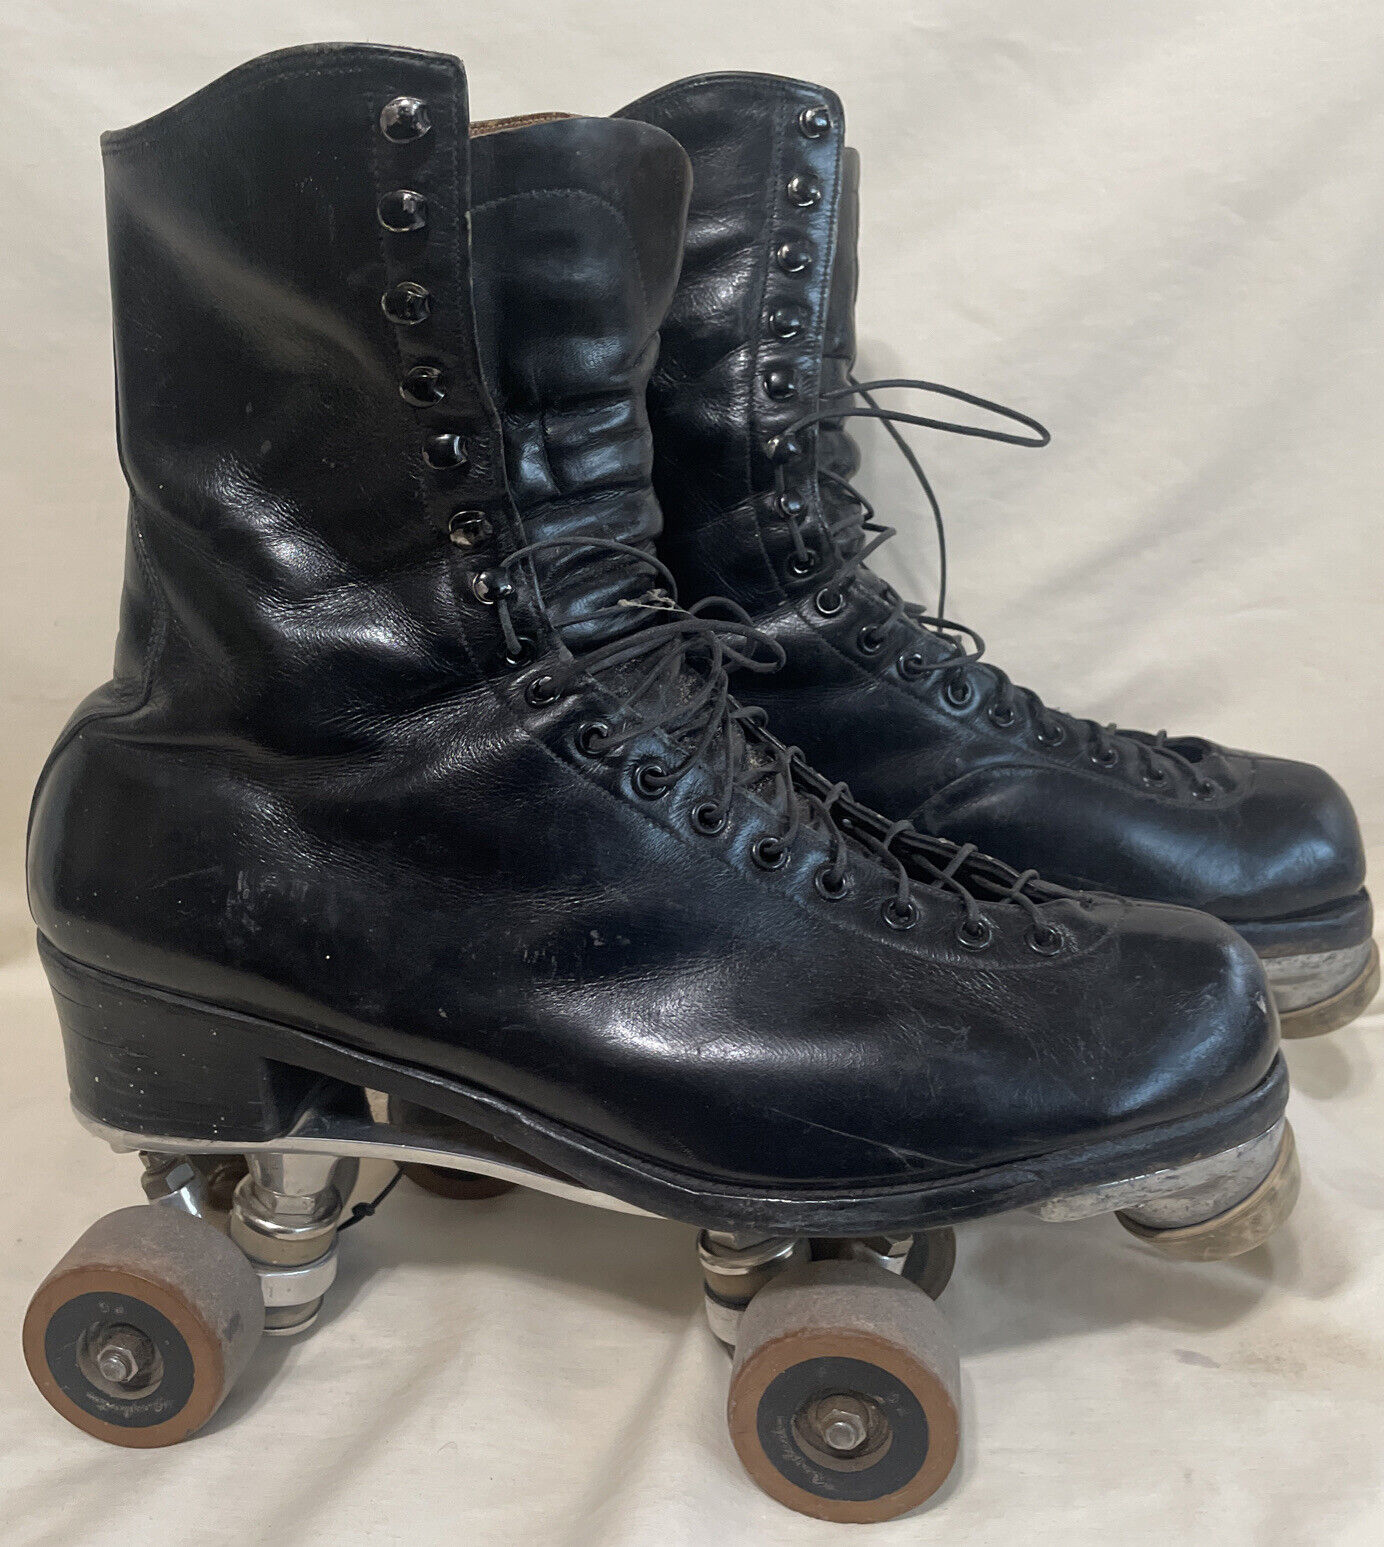 Riedell Red Wing Roller Skates - Size 10.5 Black - Vintage High Usa 4912